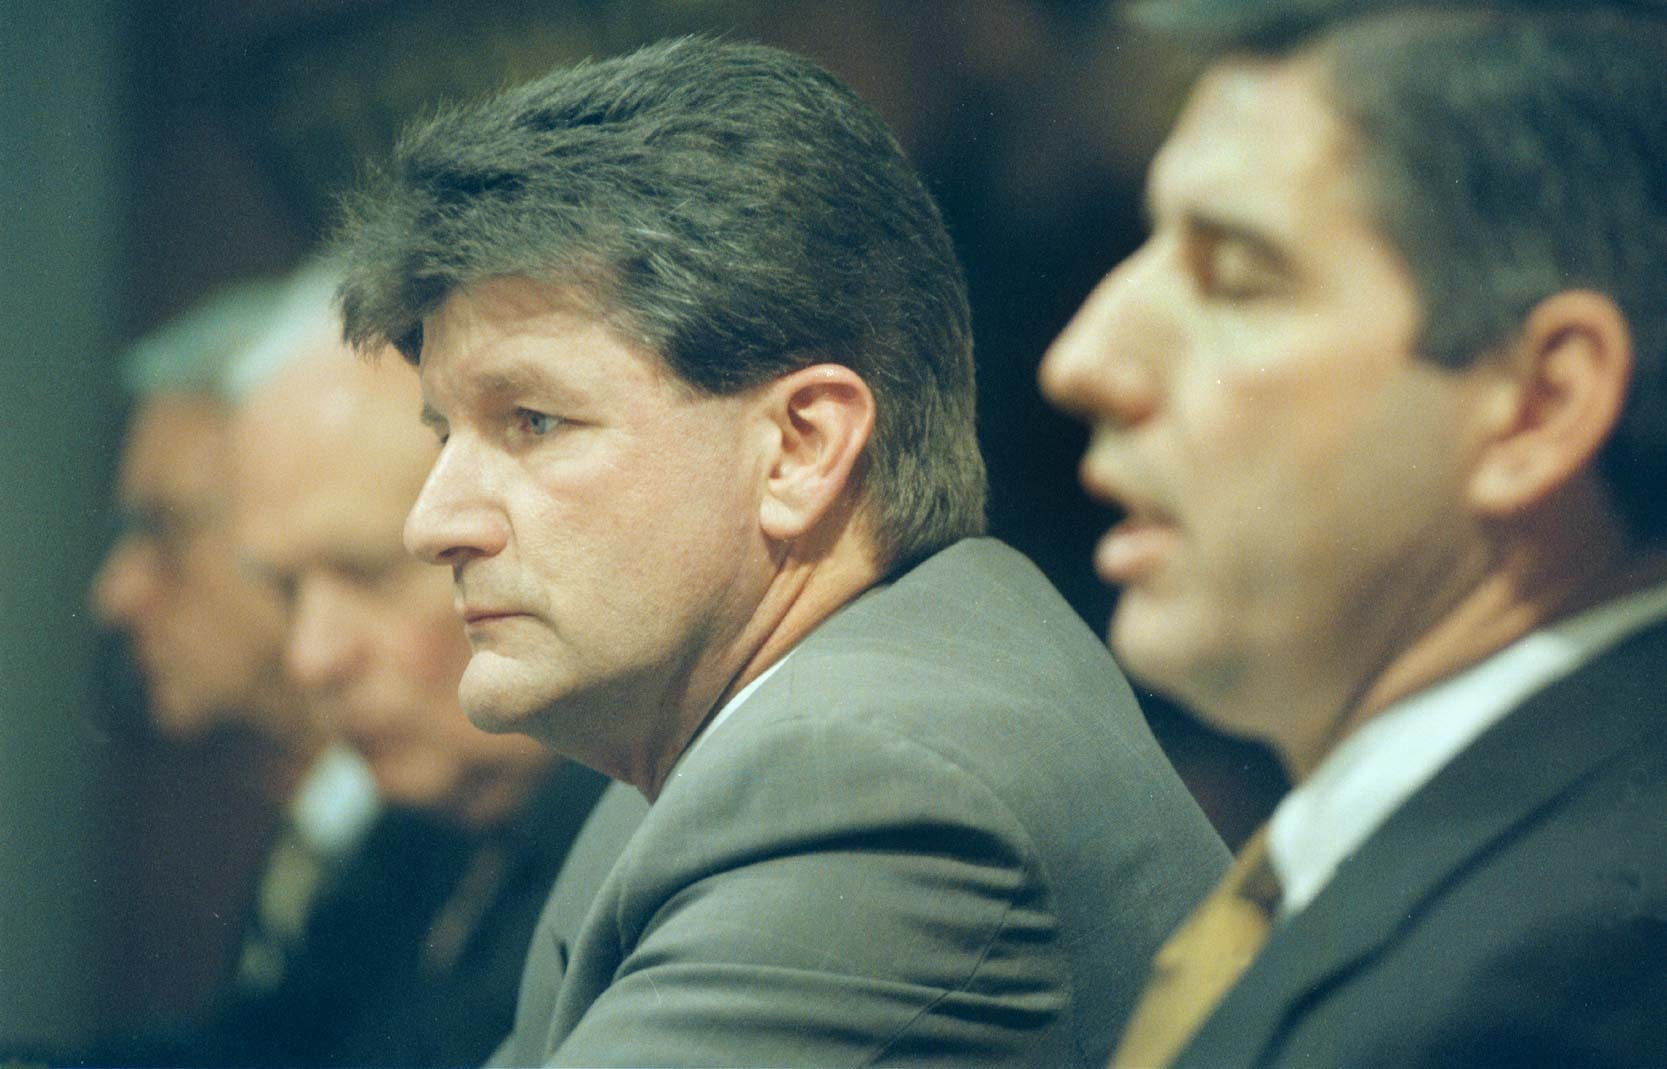 From 1996: Gary Dolphin listens as University of Iowa Athletic Director Bob Bowlsby, right, responds to a question during a news conference after Dolphin was named the new radio play-by-play announcer for the university and Learfield Communications, Inc. In background are Jim Zabel (left) and Bob Brooks.